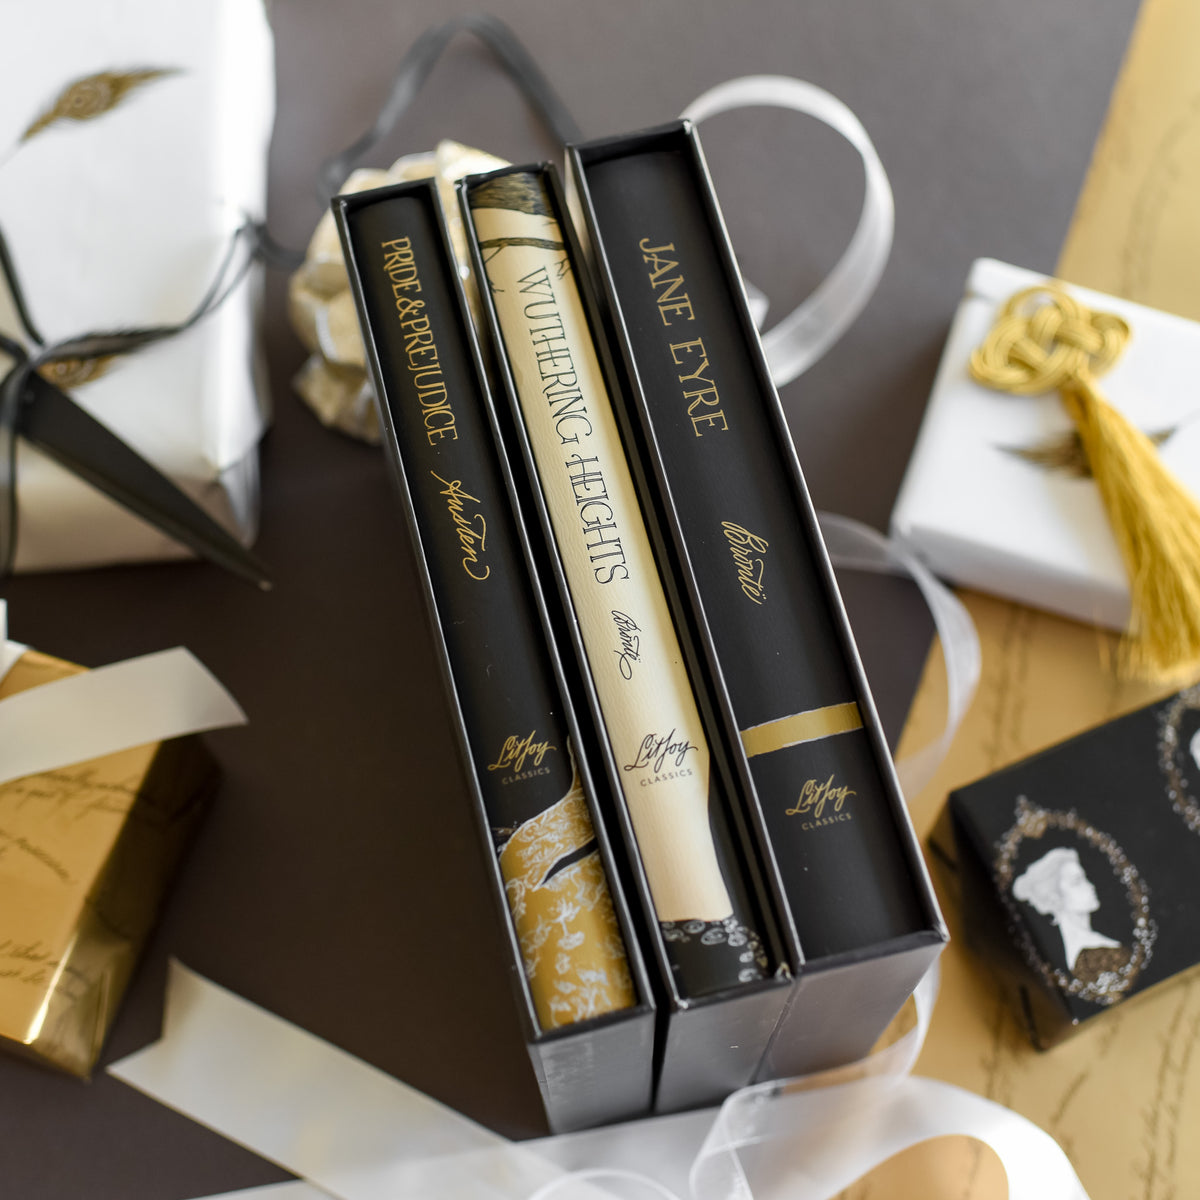 Classic Book Romantic Collection with black and gold special editions of Pride and Prejudice, Wuthering Heights, and Jane Eyre